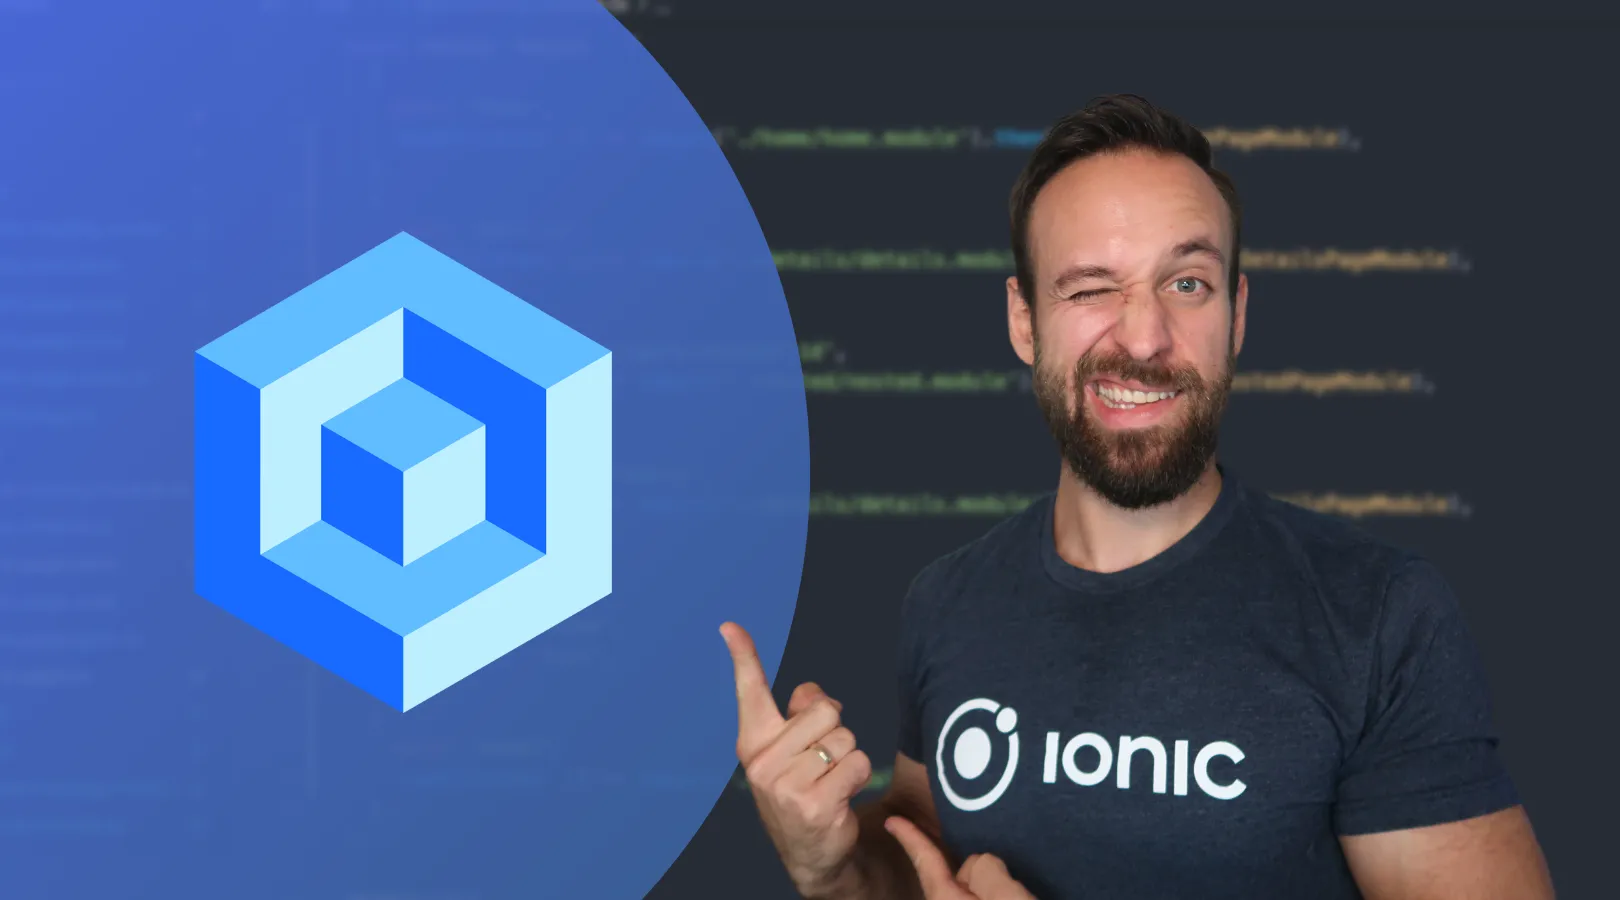 How to Capture and Store Images with Ionic